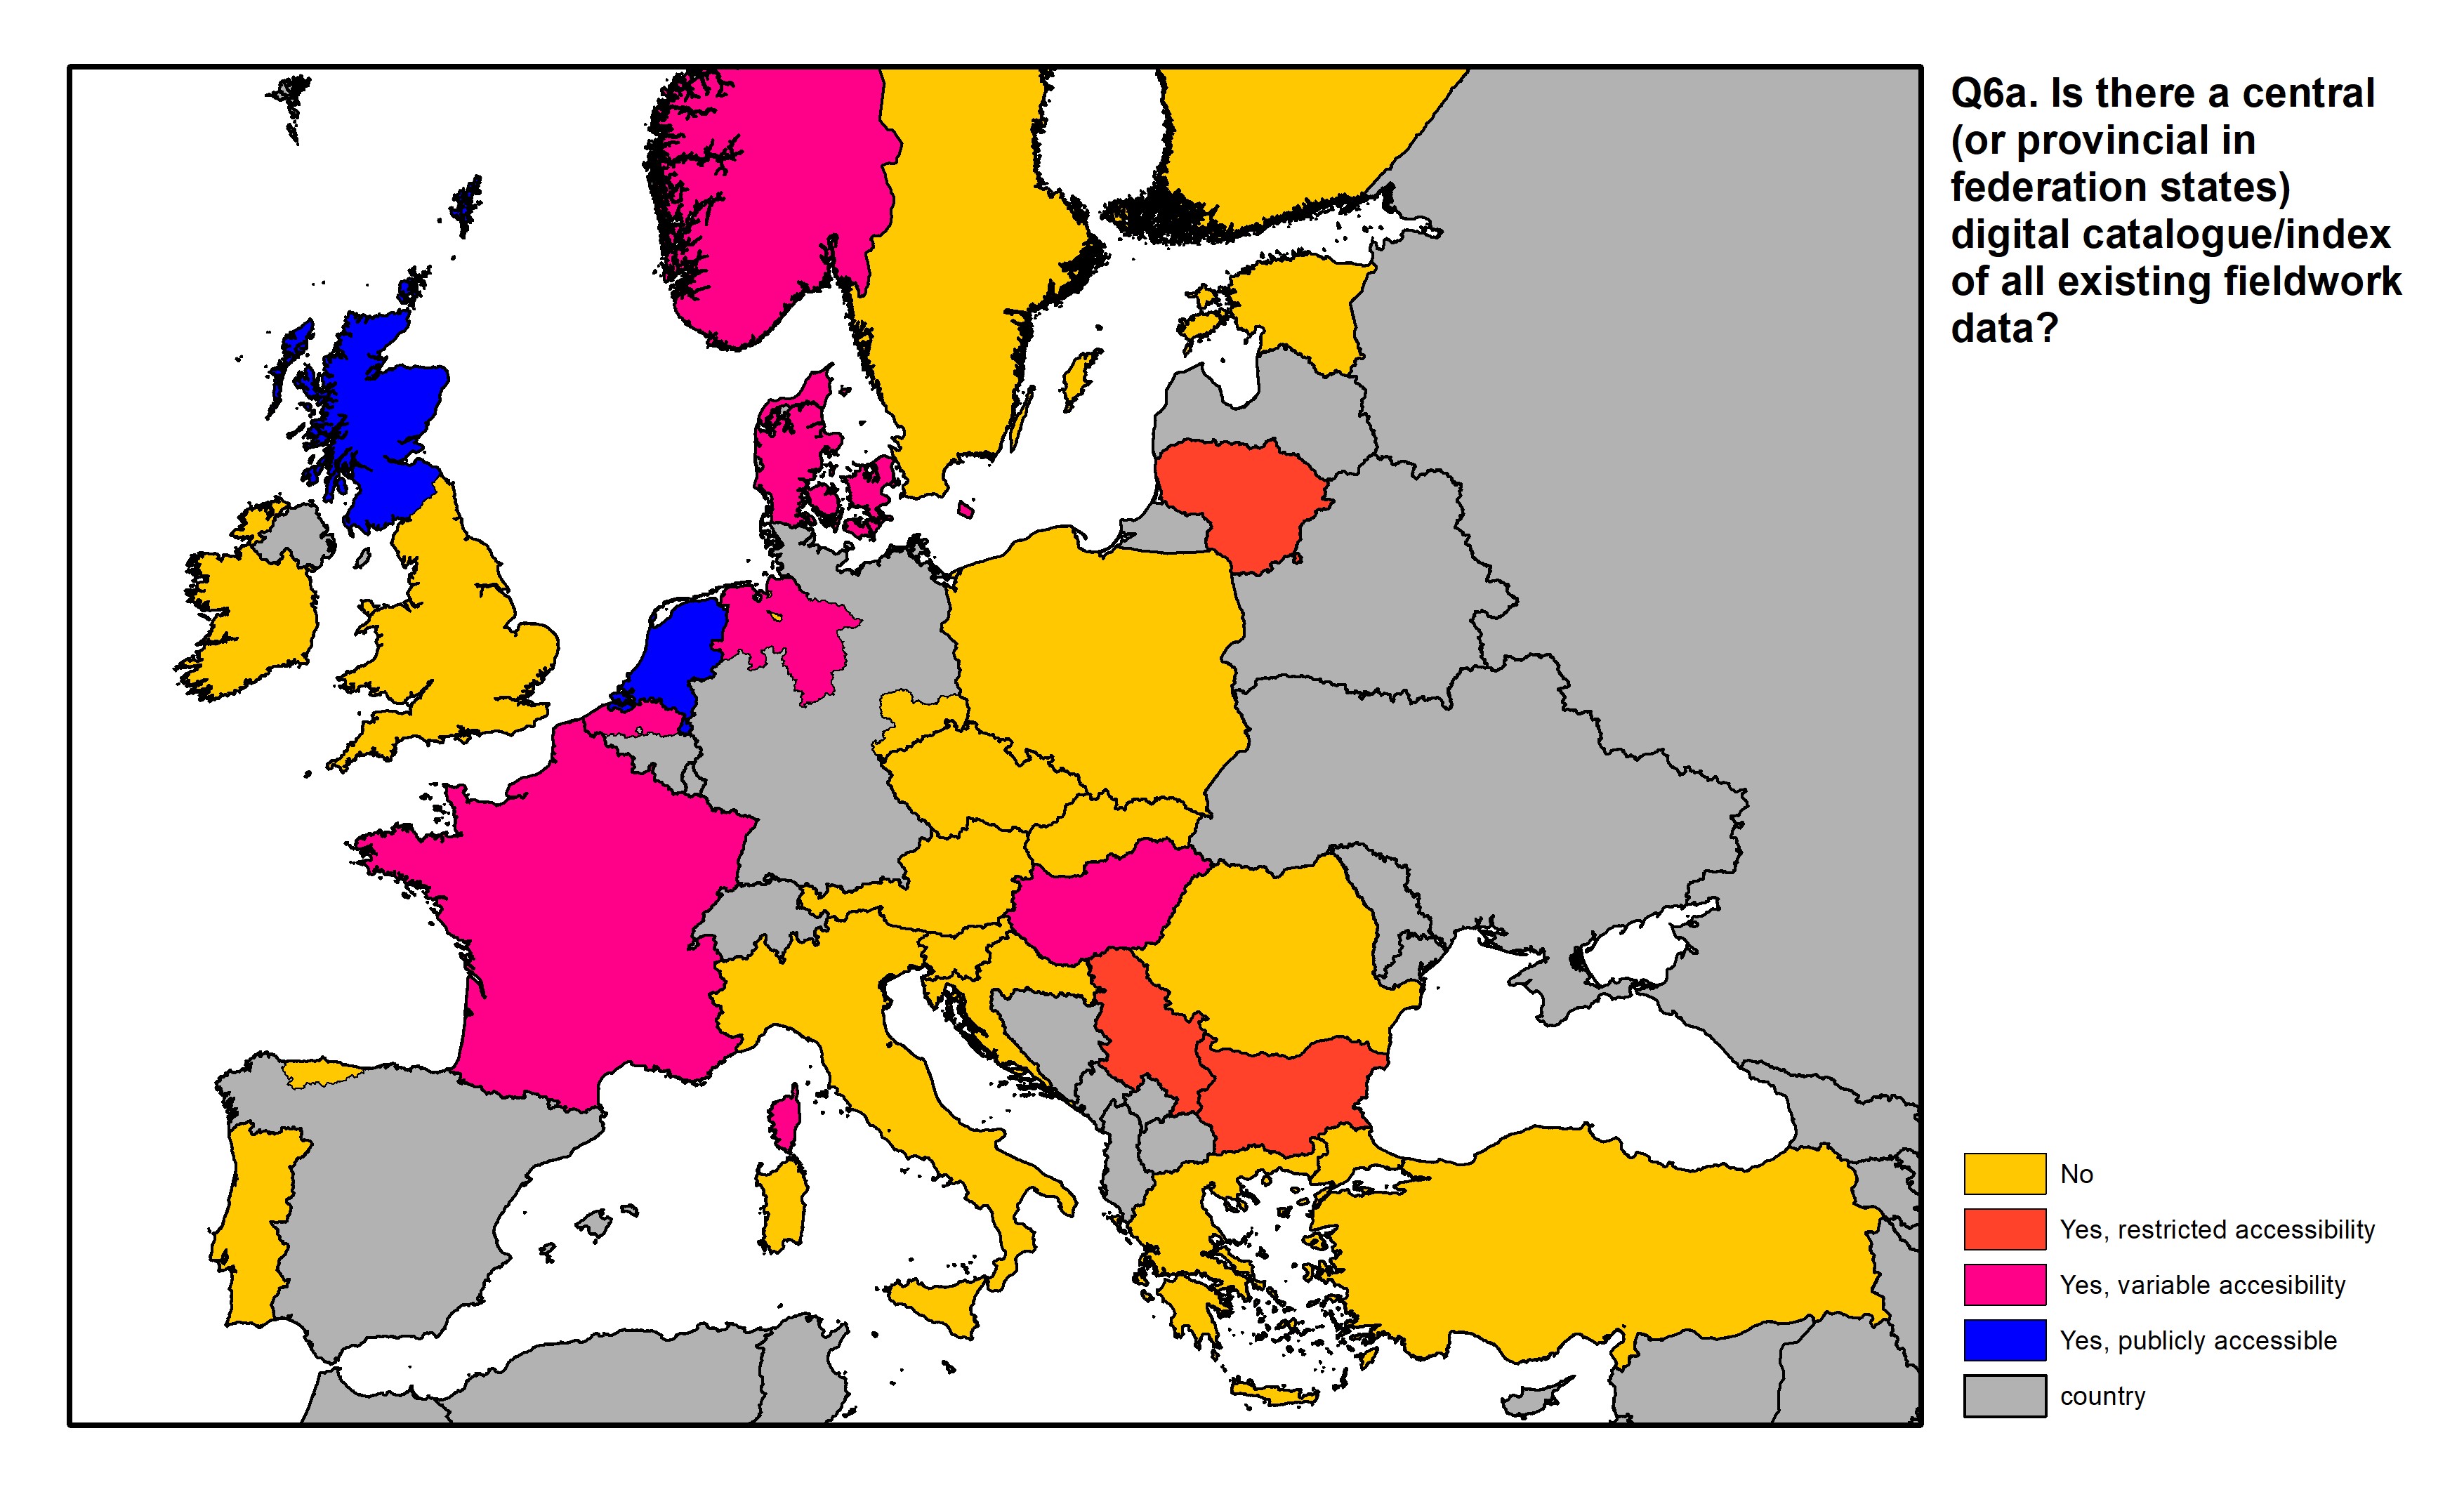 Figure 18: a map of Europe showing countries and regions in colour based on response rates to the survey question.